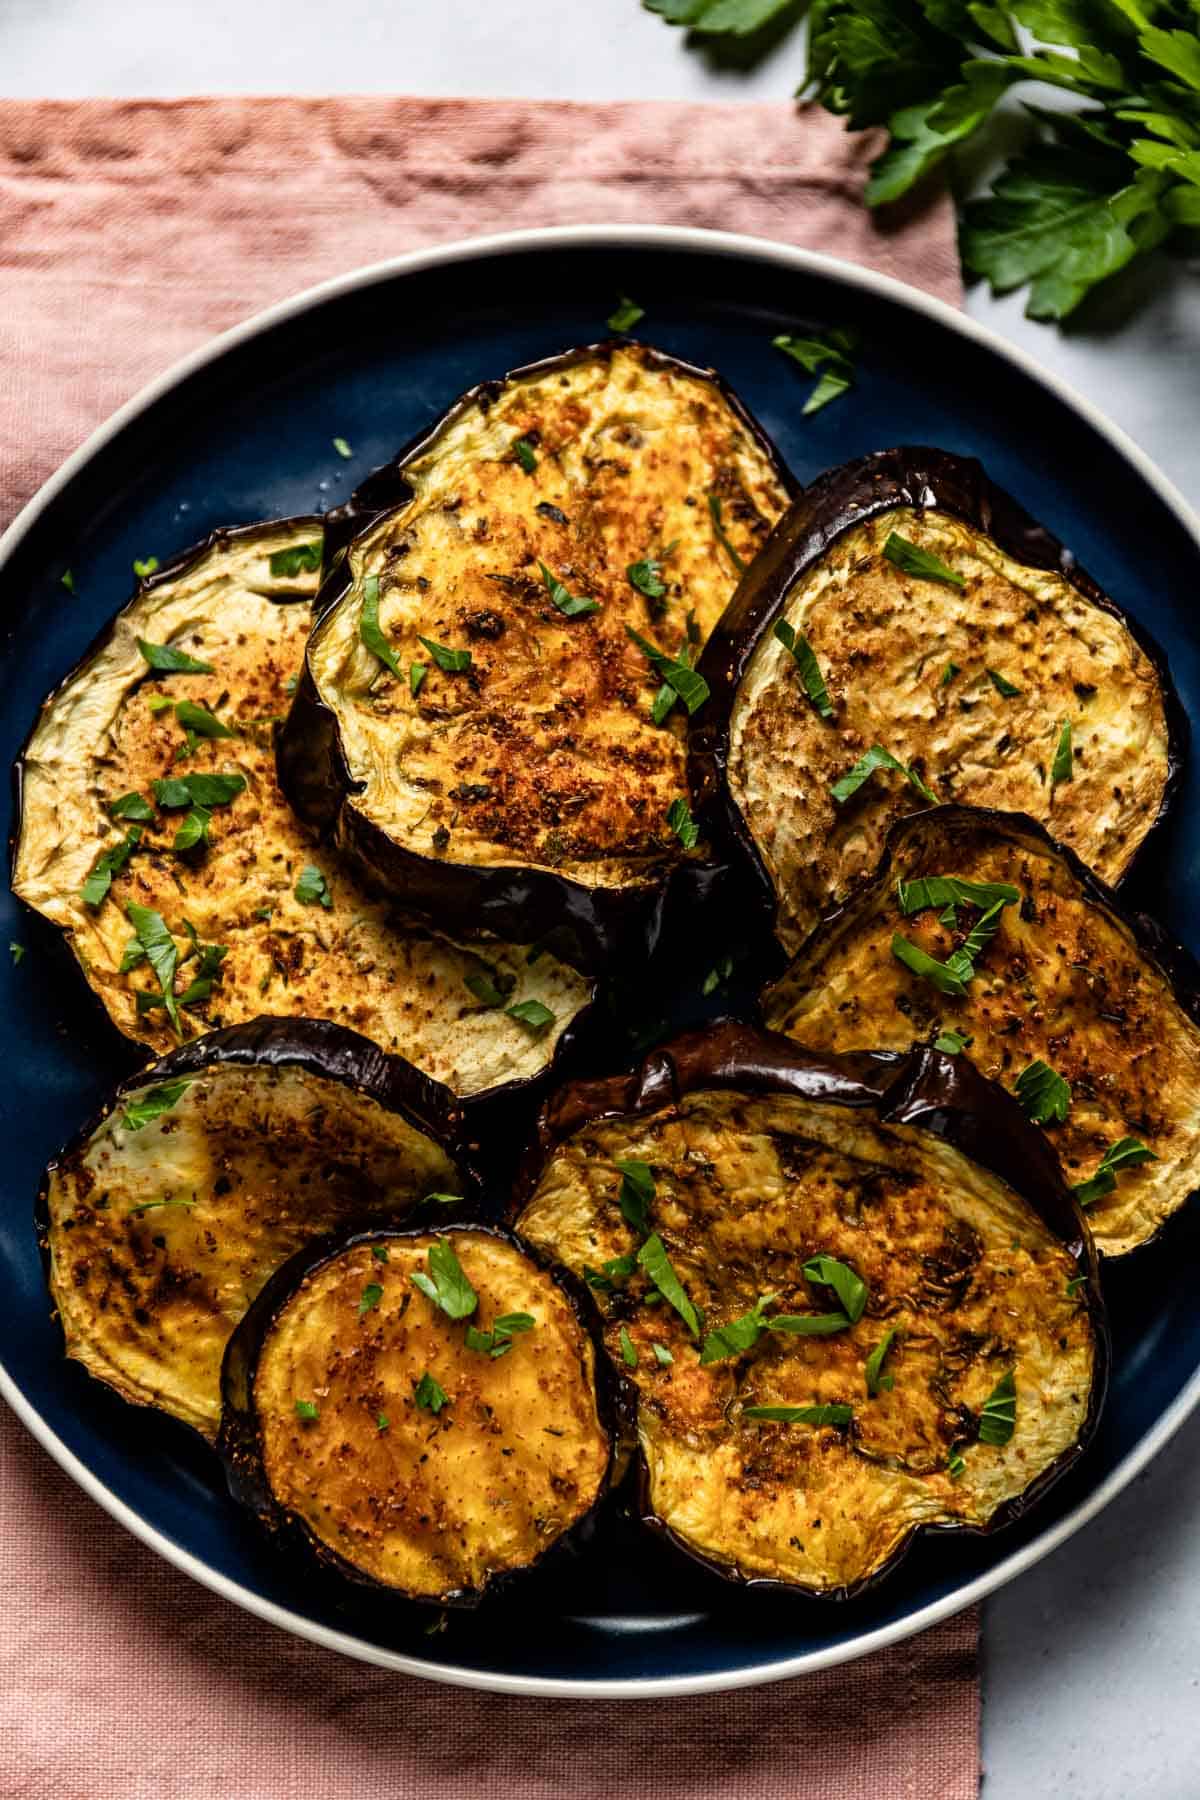 Air fried eggplant slices on a plate from the top view.